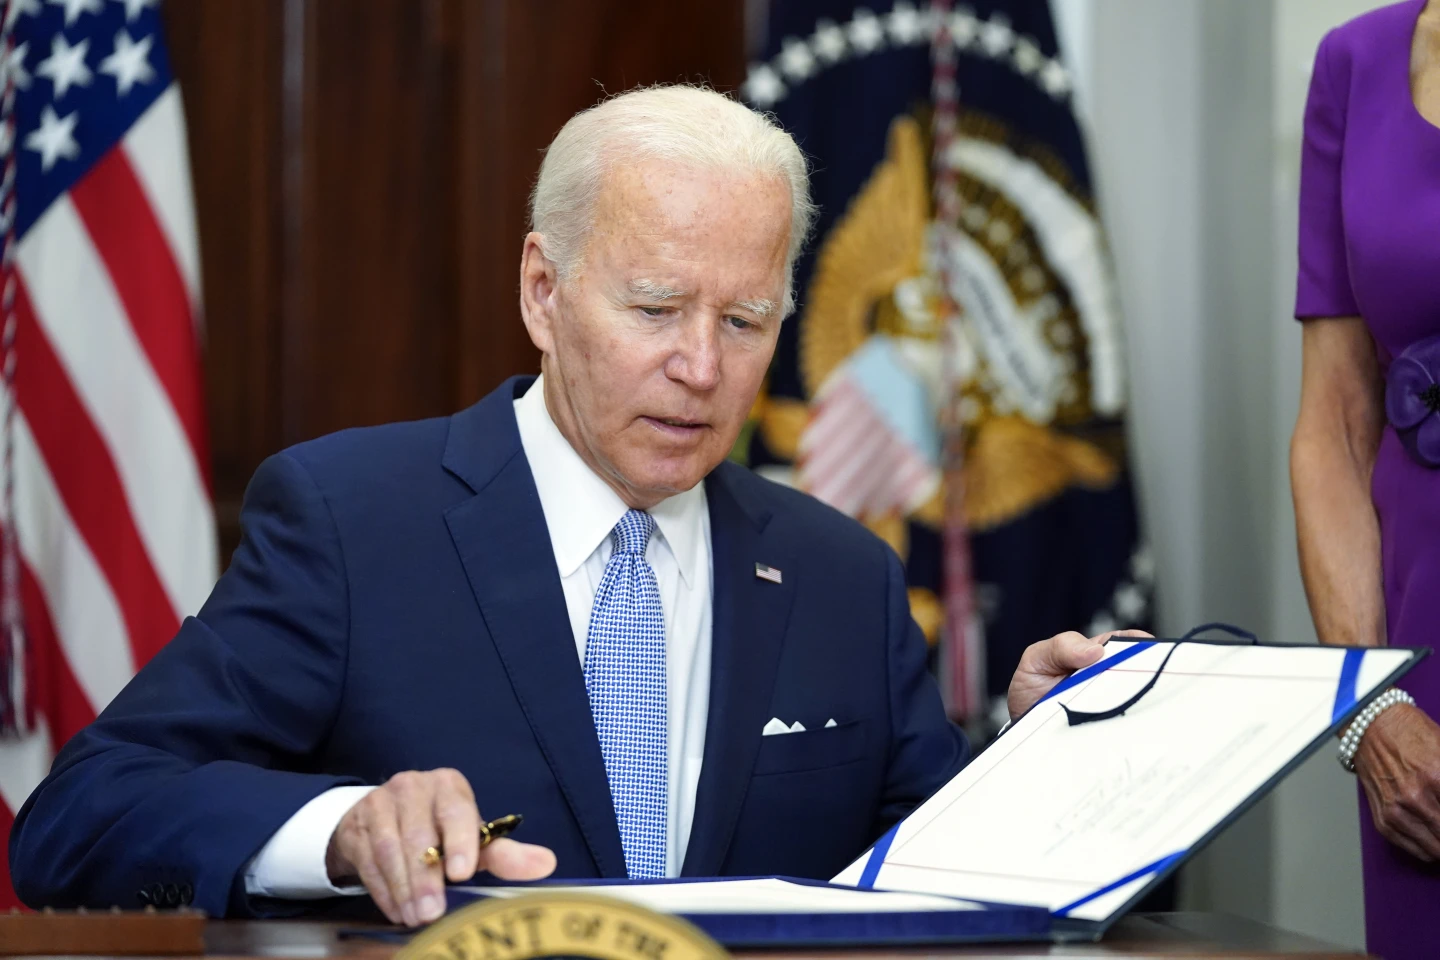 More than 500 people have been charged with federal crimes under the gun safety law Biden signed (apnews.com)